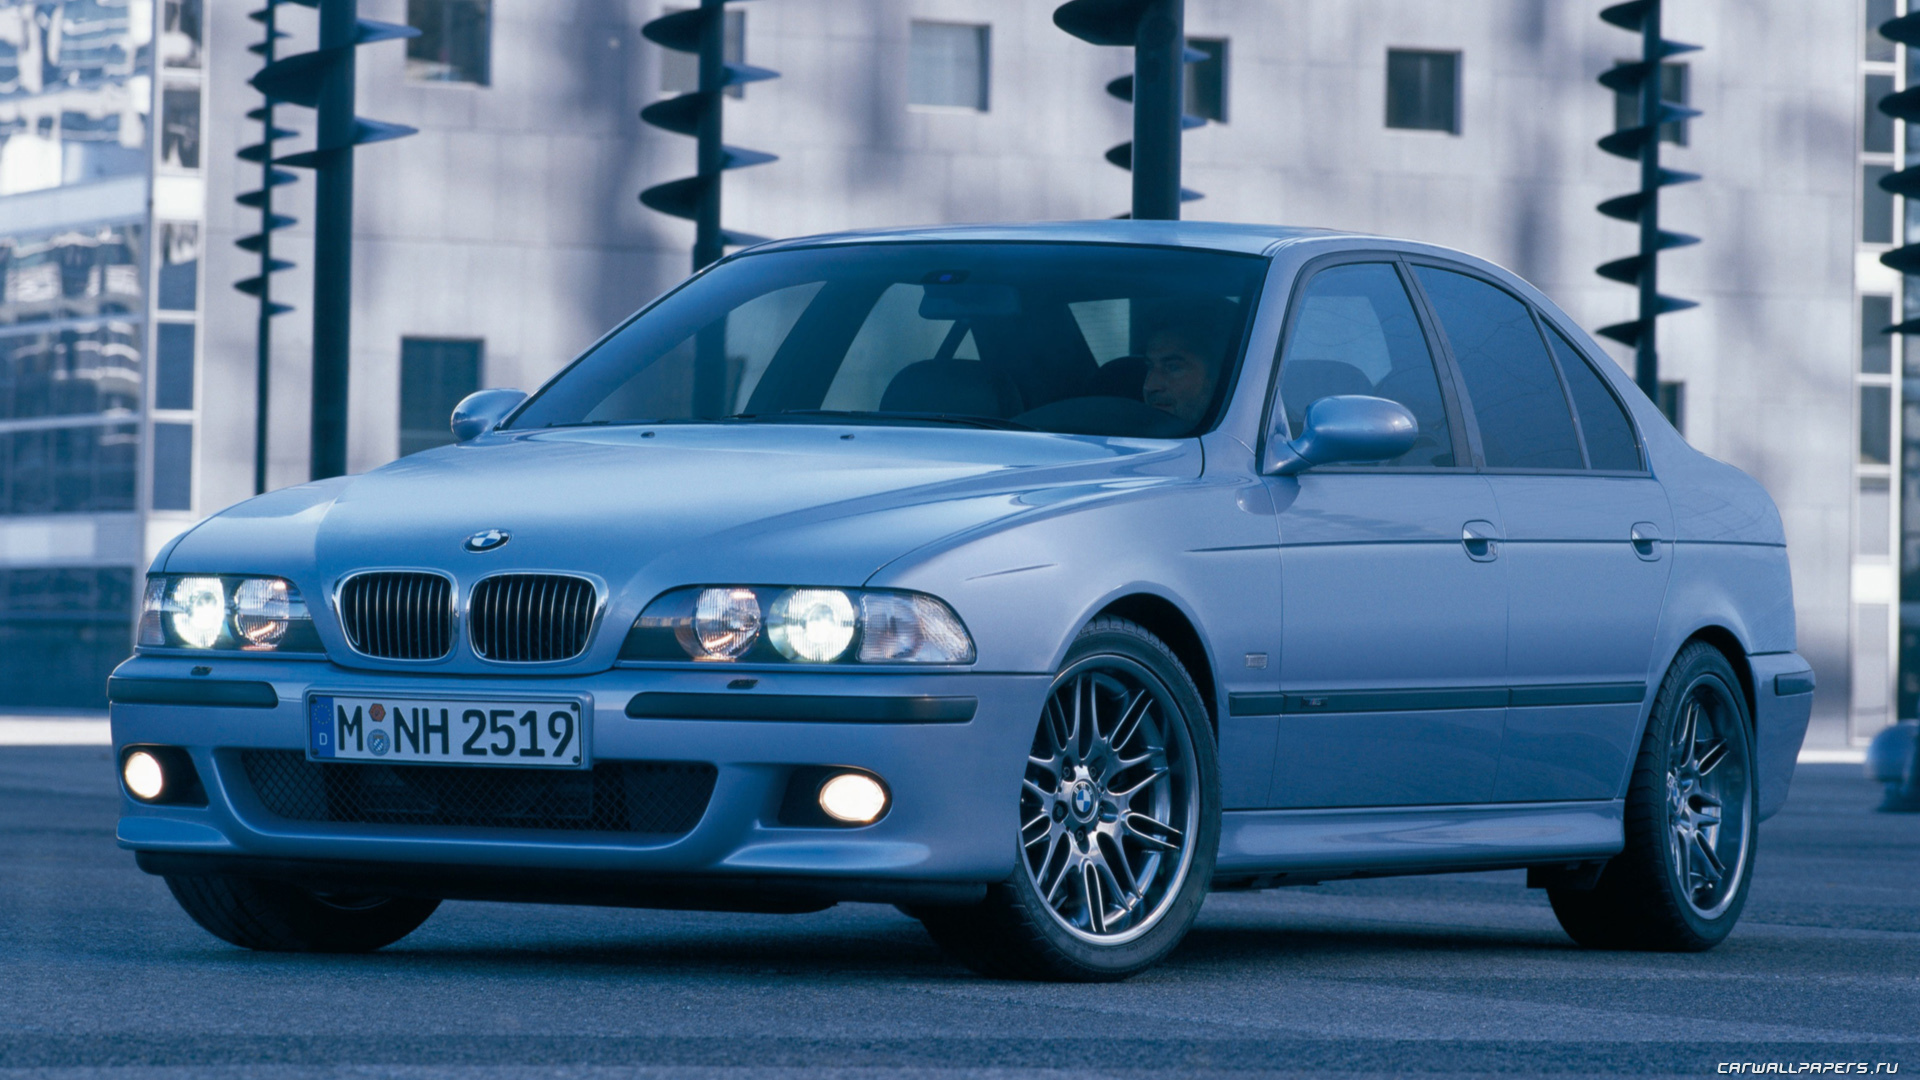 BMW e39 Wallpapers Images Photos Pictures Backgrounds